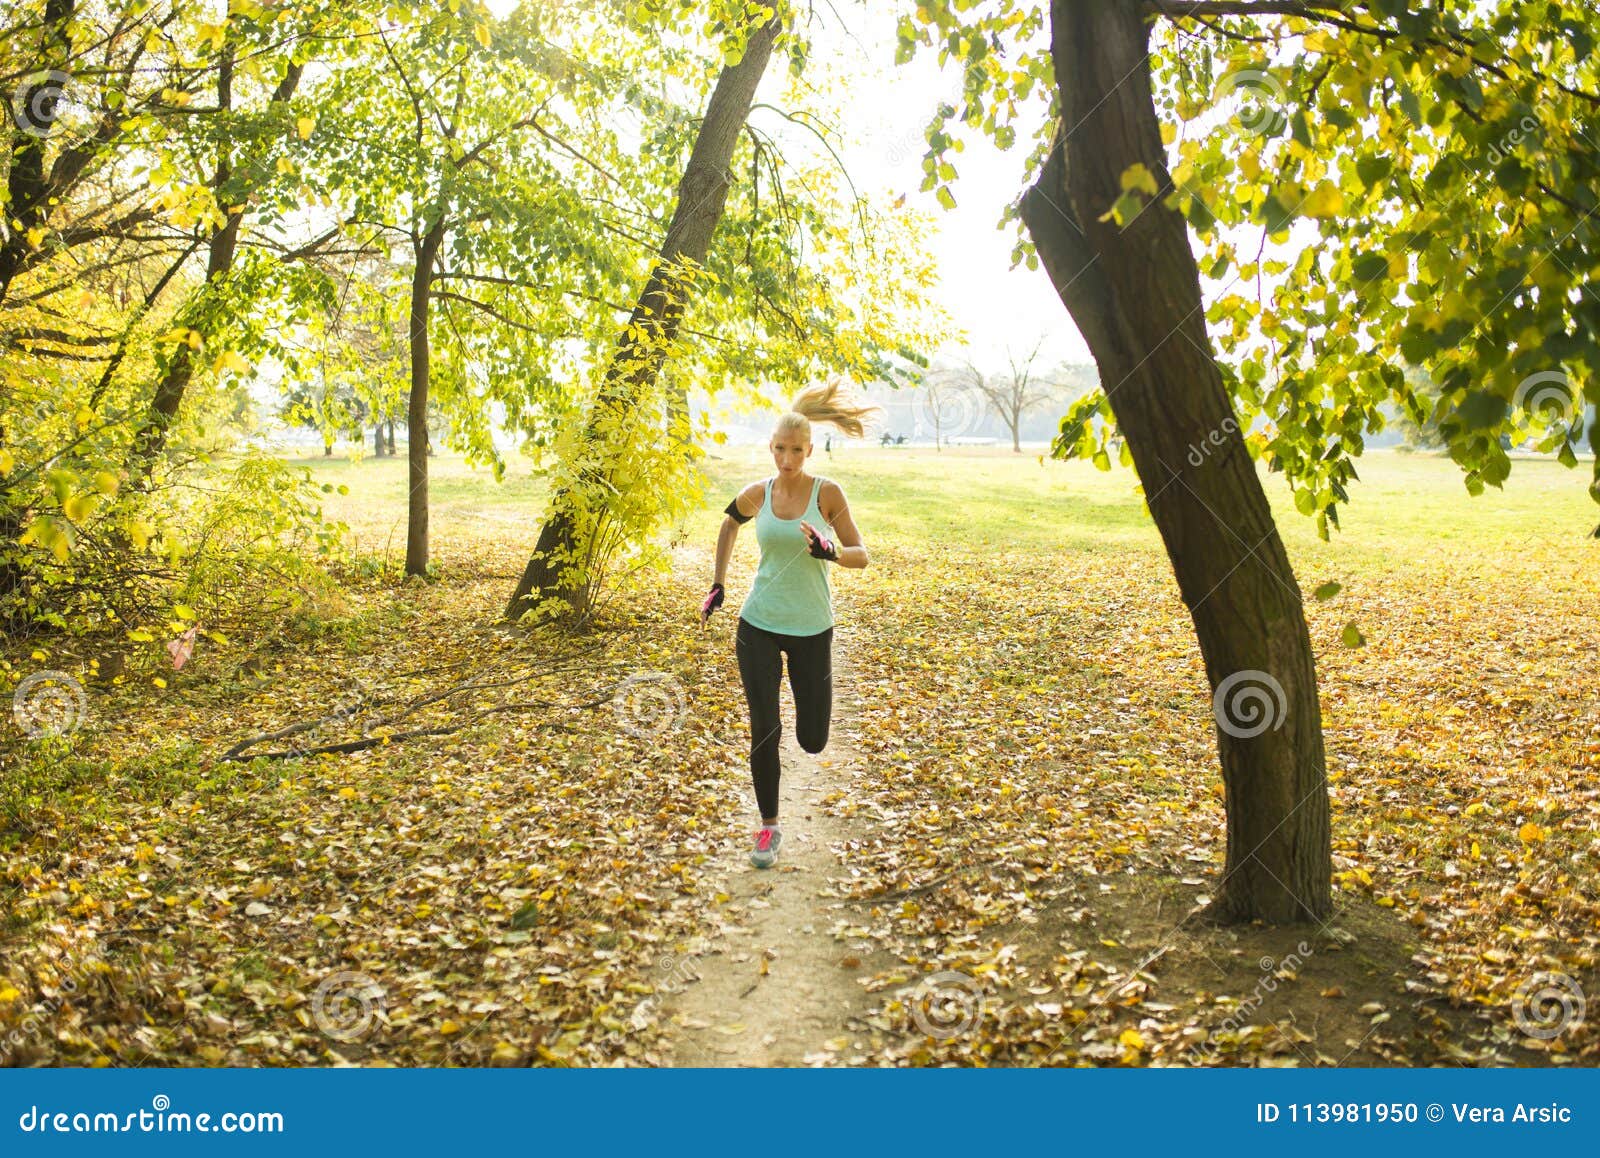 Blonde running in the park stock photo. Image of fashionable - 113981950